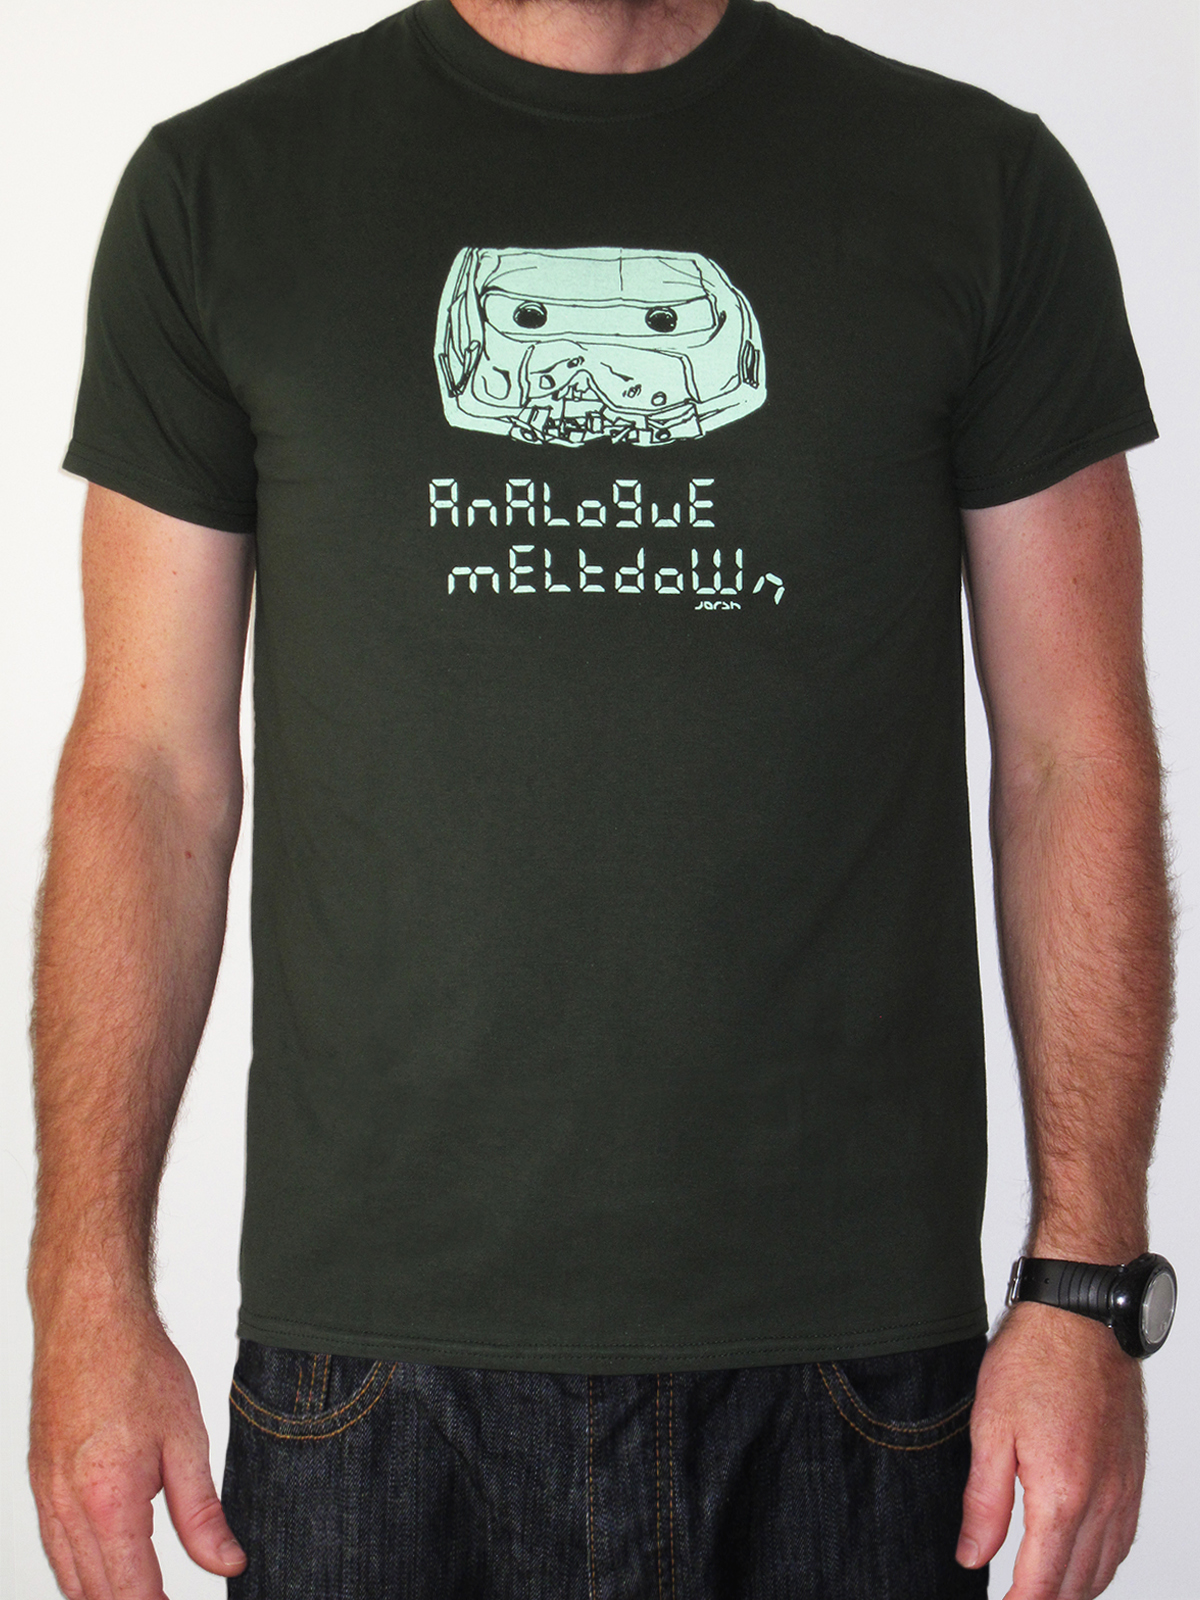 t-shirt with warped analogue cassette in state of meltdown